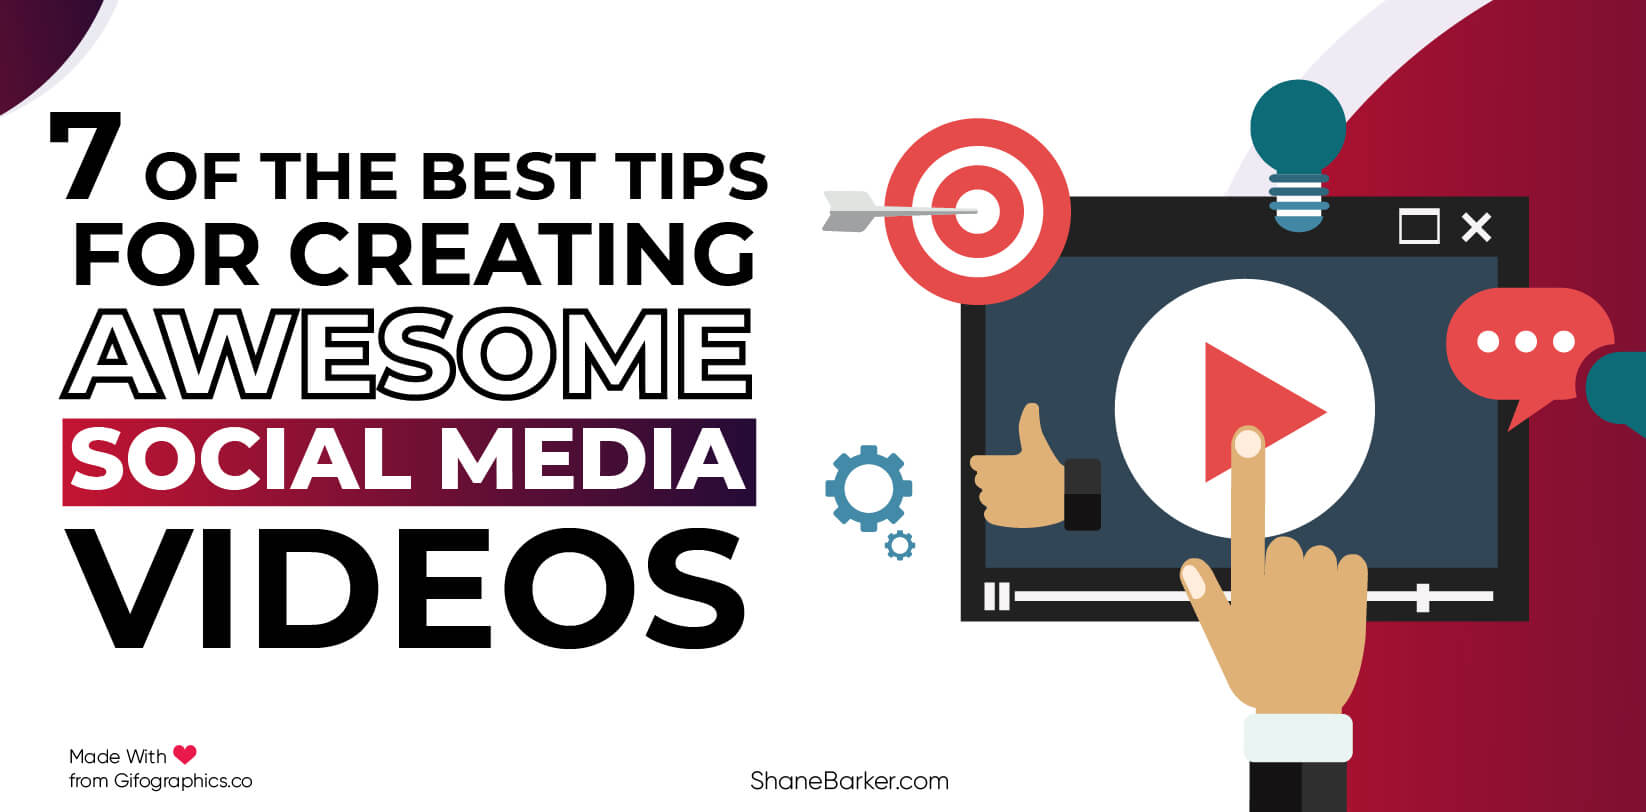 7 best tips for social media videos: create awesome content